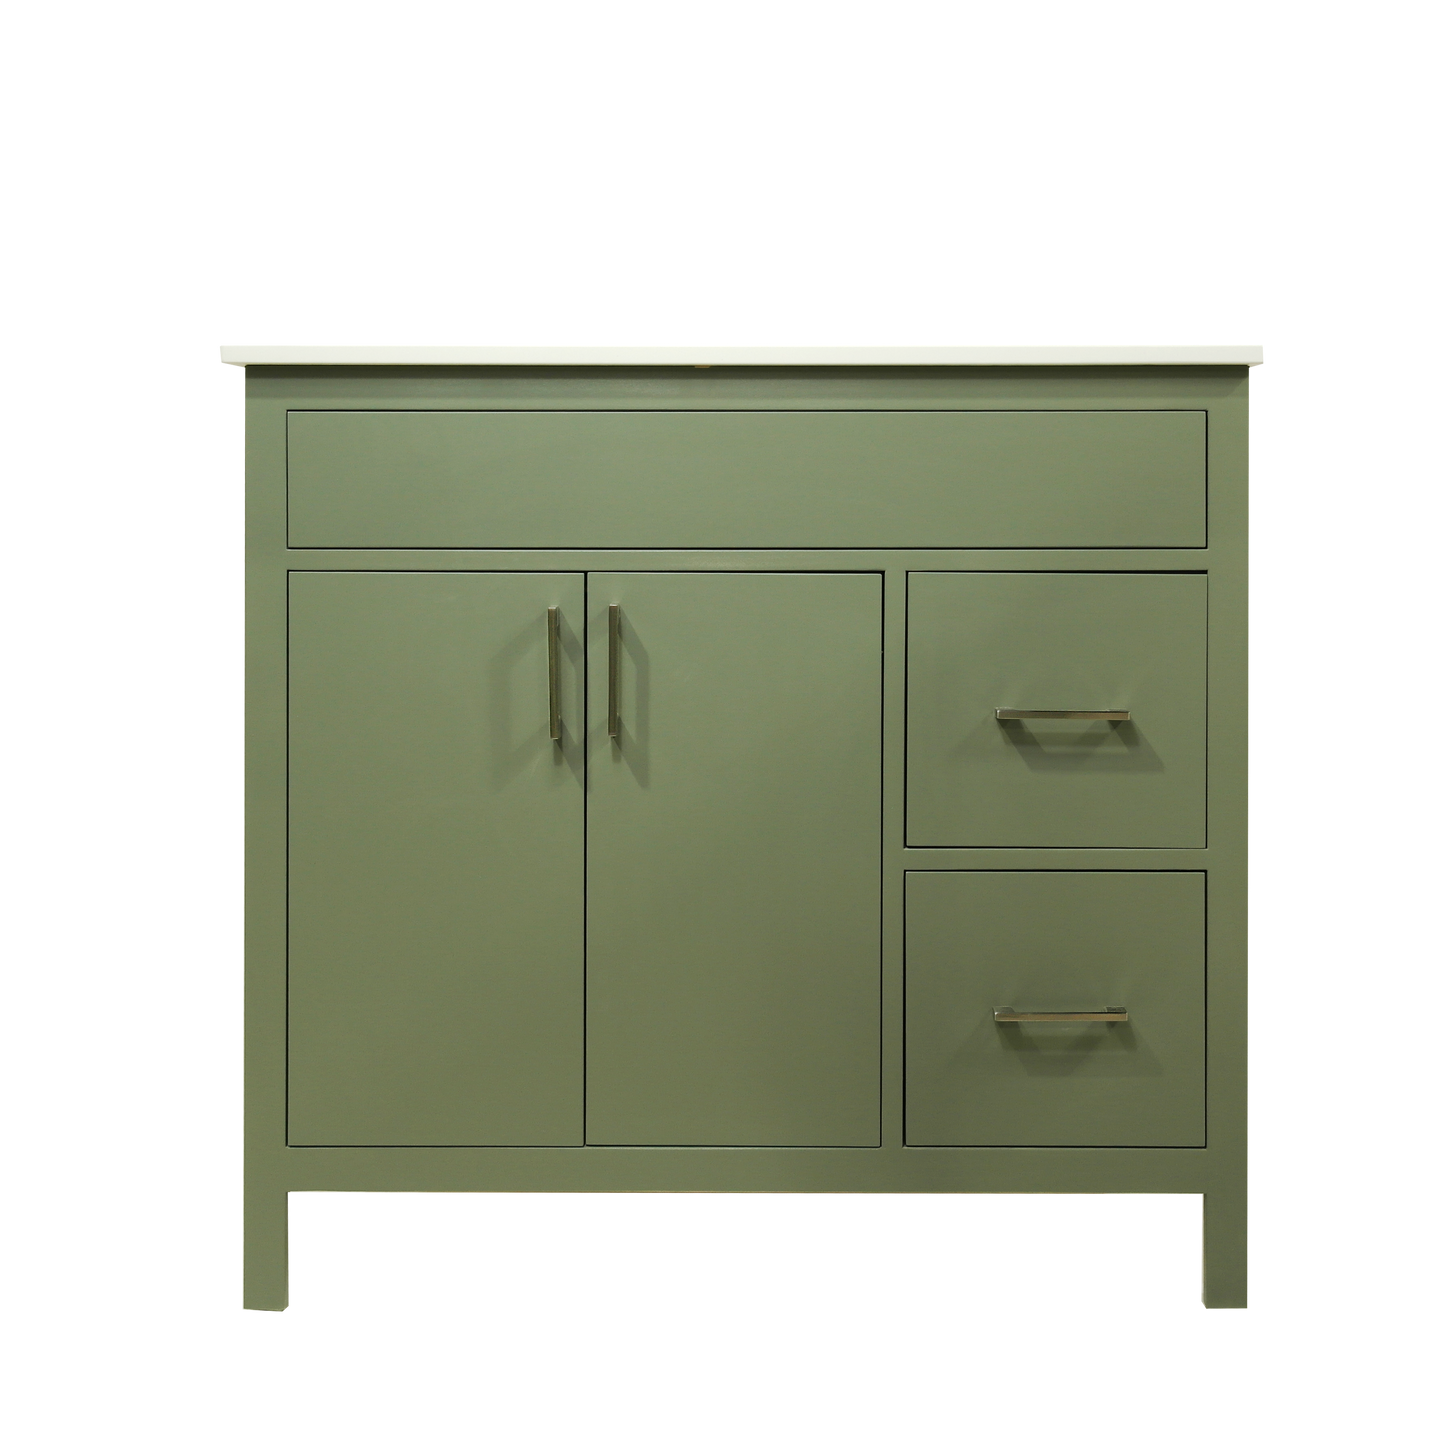 36" Mirea style lush colour  wood bathroom vanity with 2 doors and 2 drawers on right side